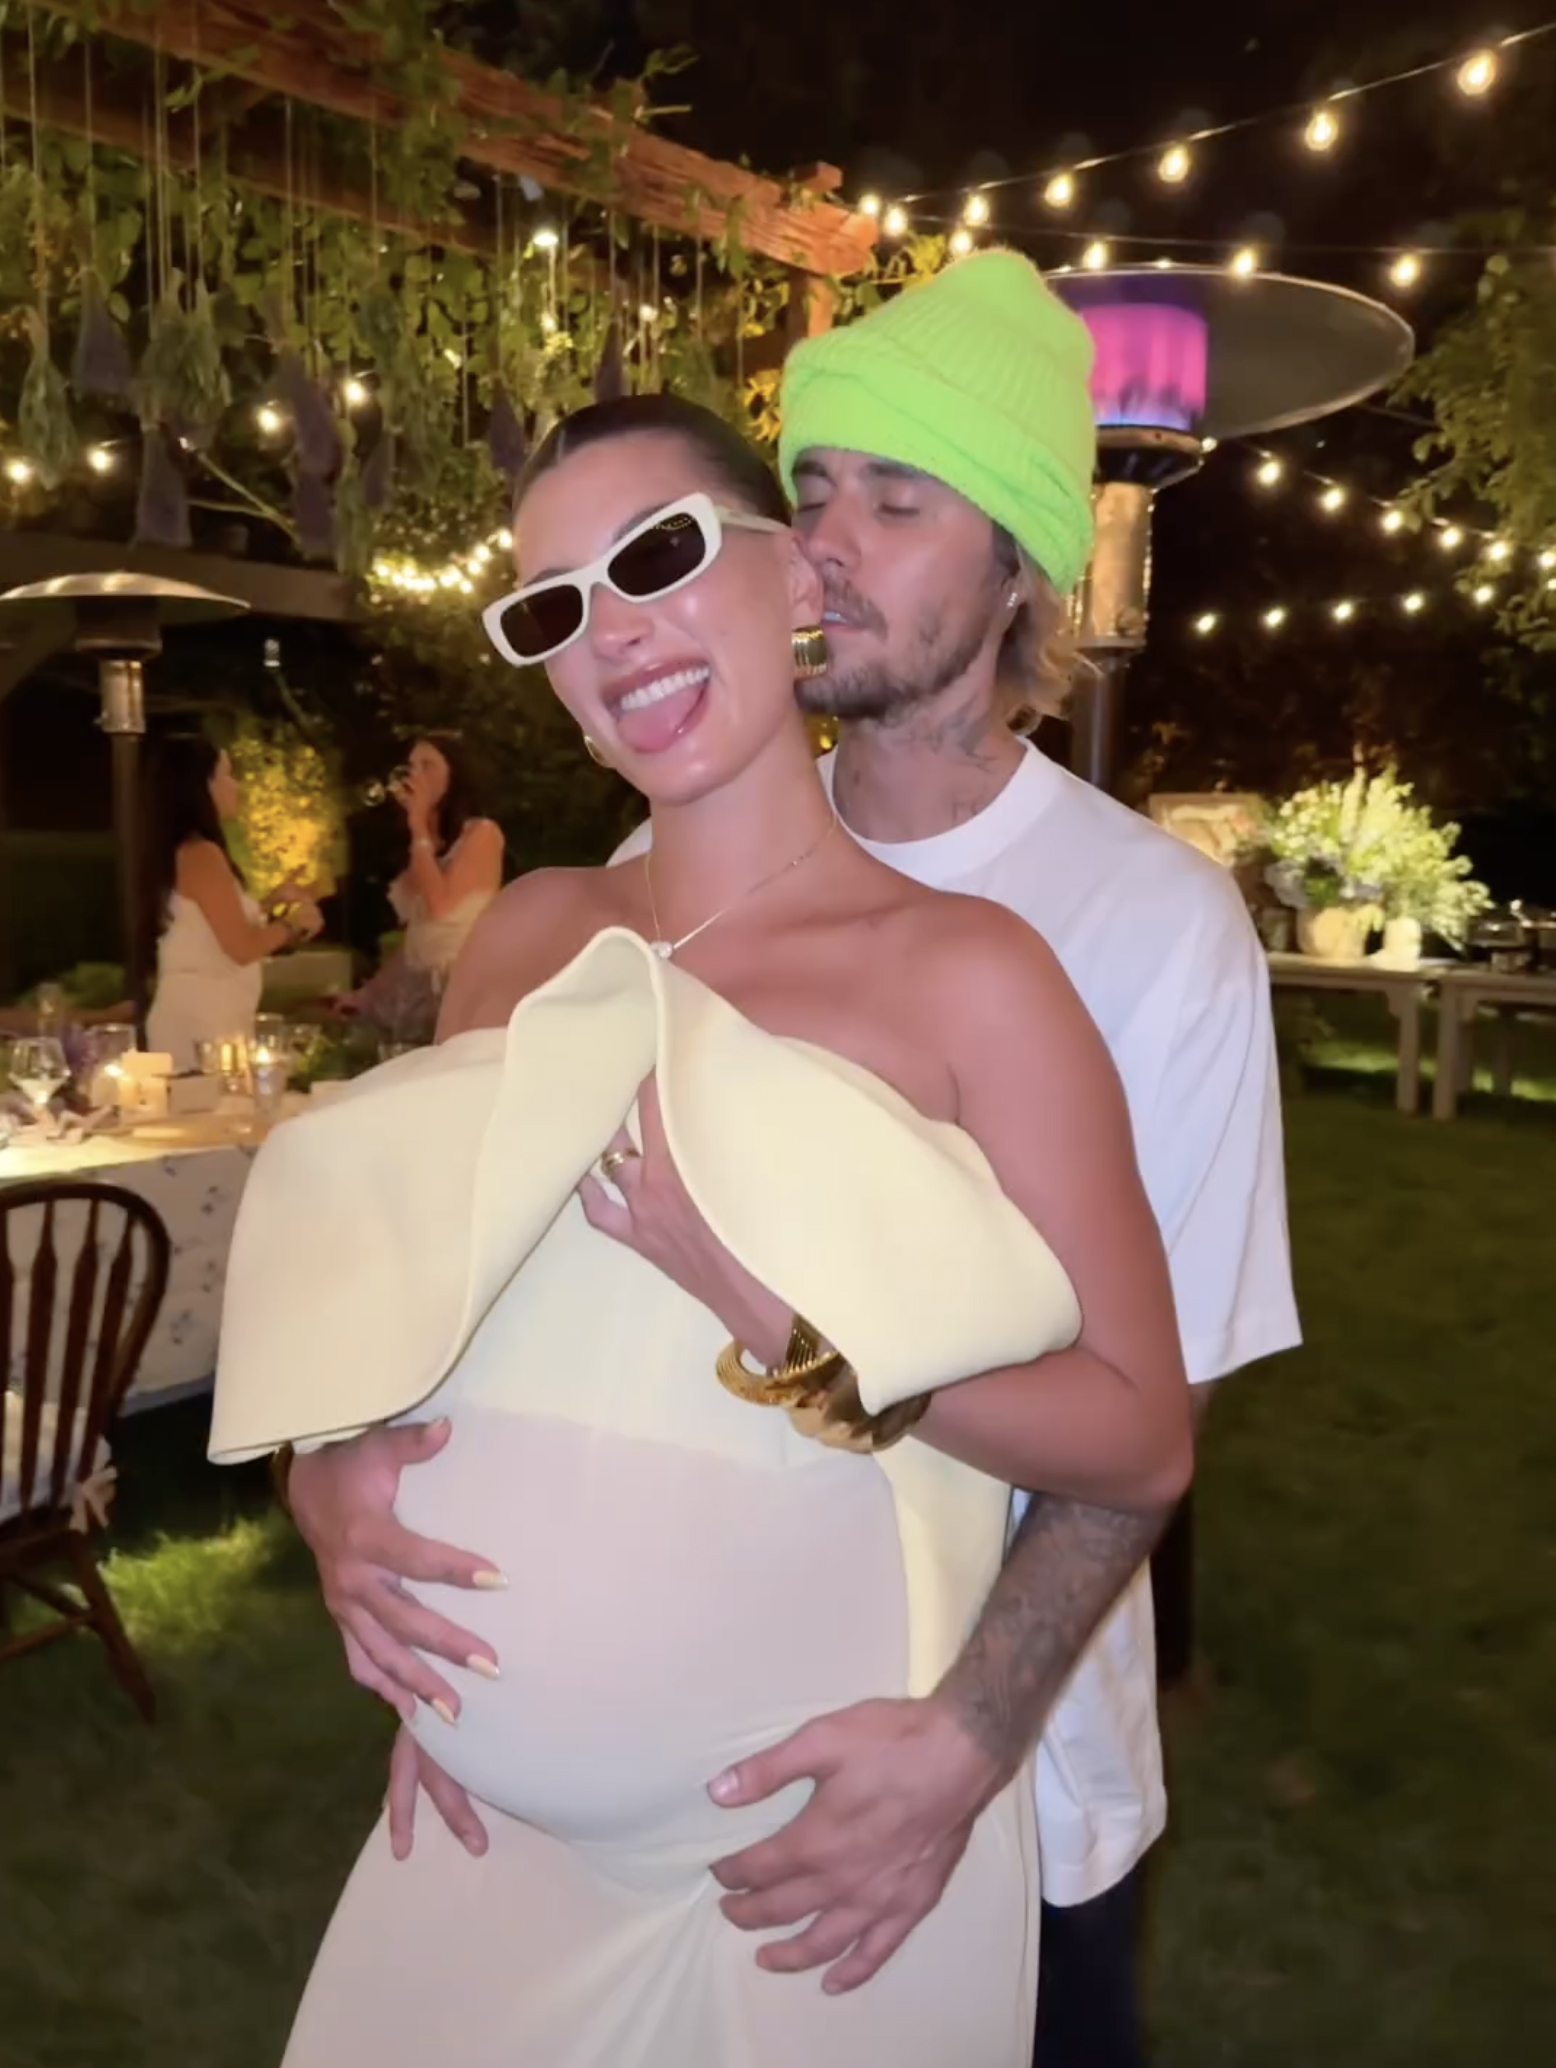 Fans speculated on Hailey and Justin's baby's gender after she shared photos from their baby shower on Instagram